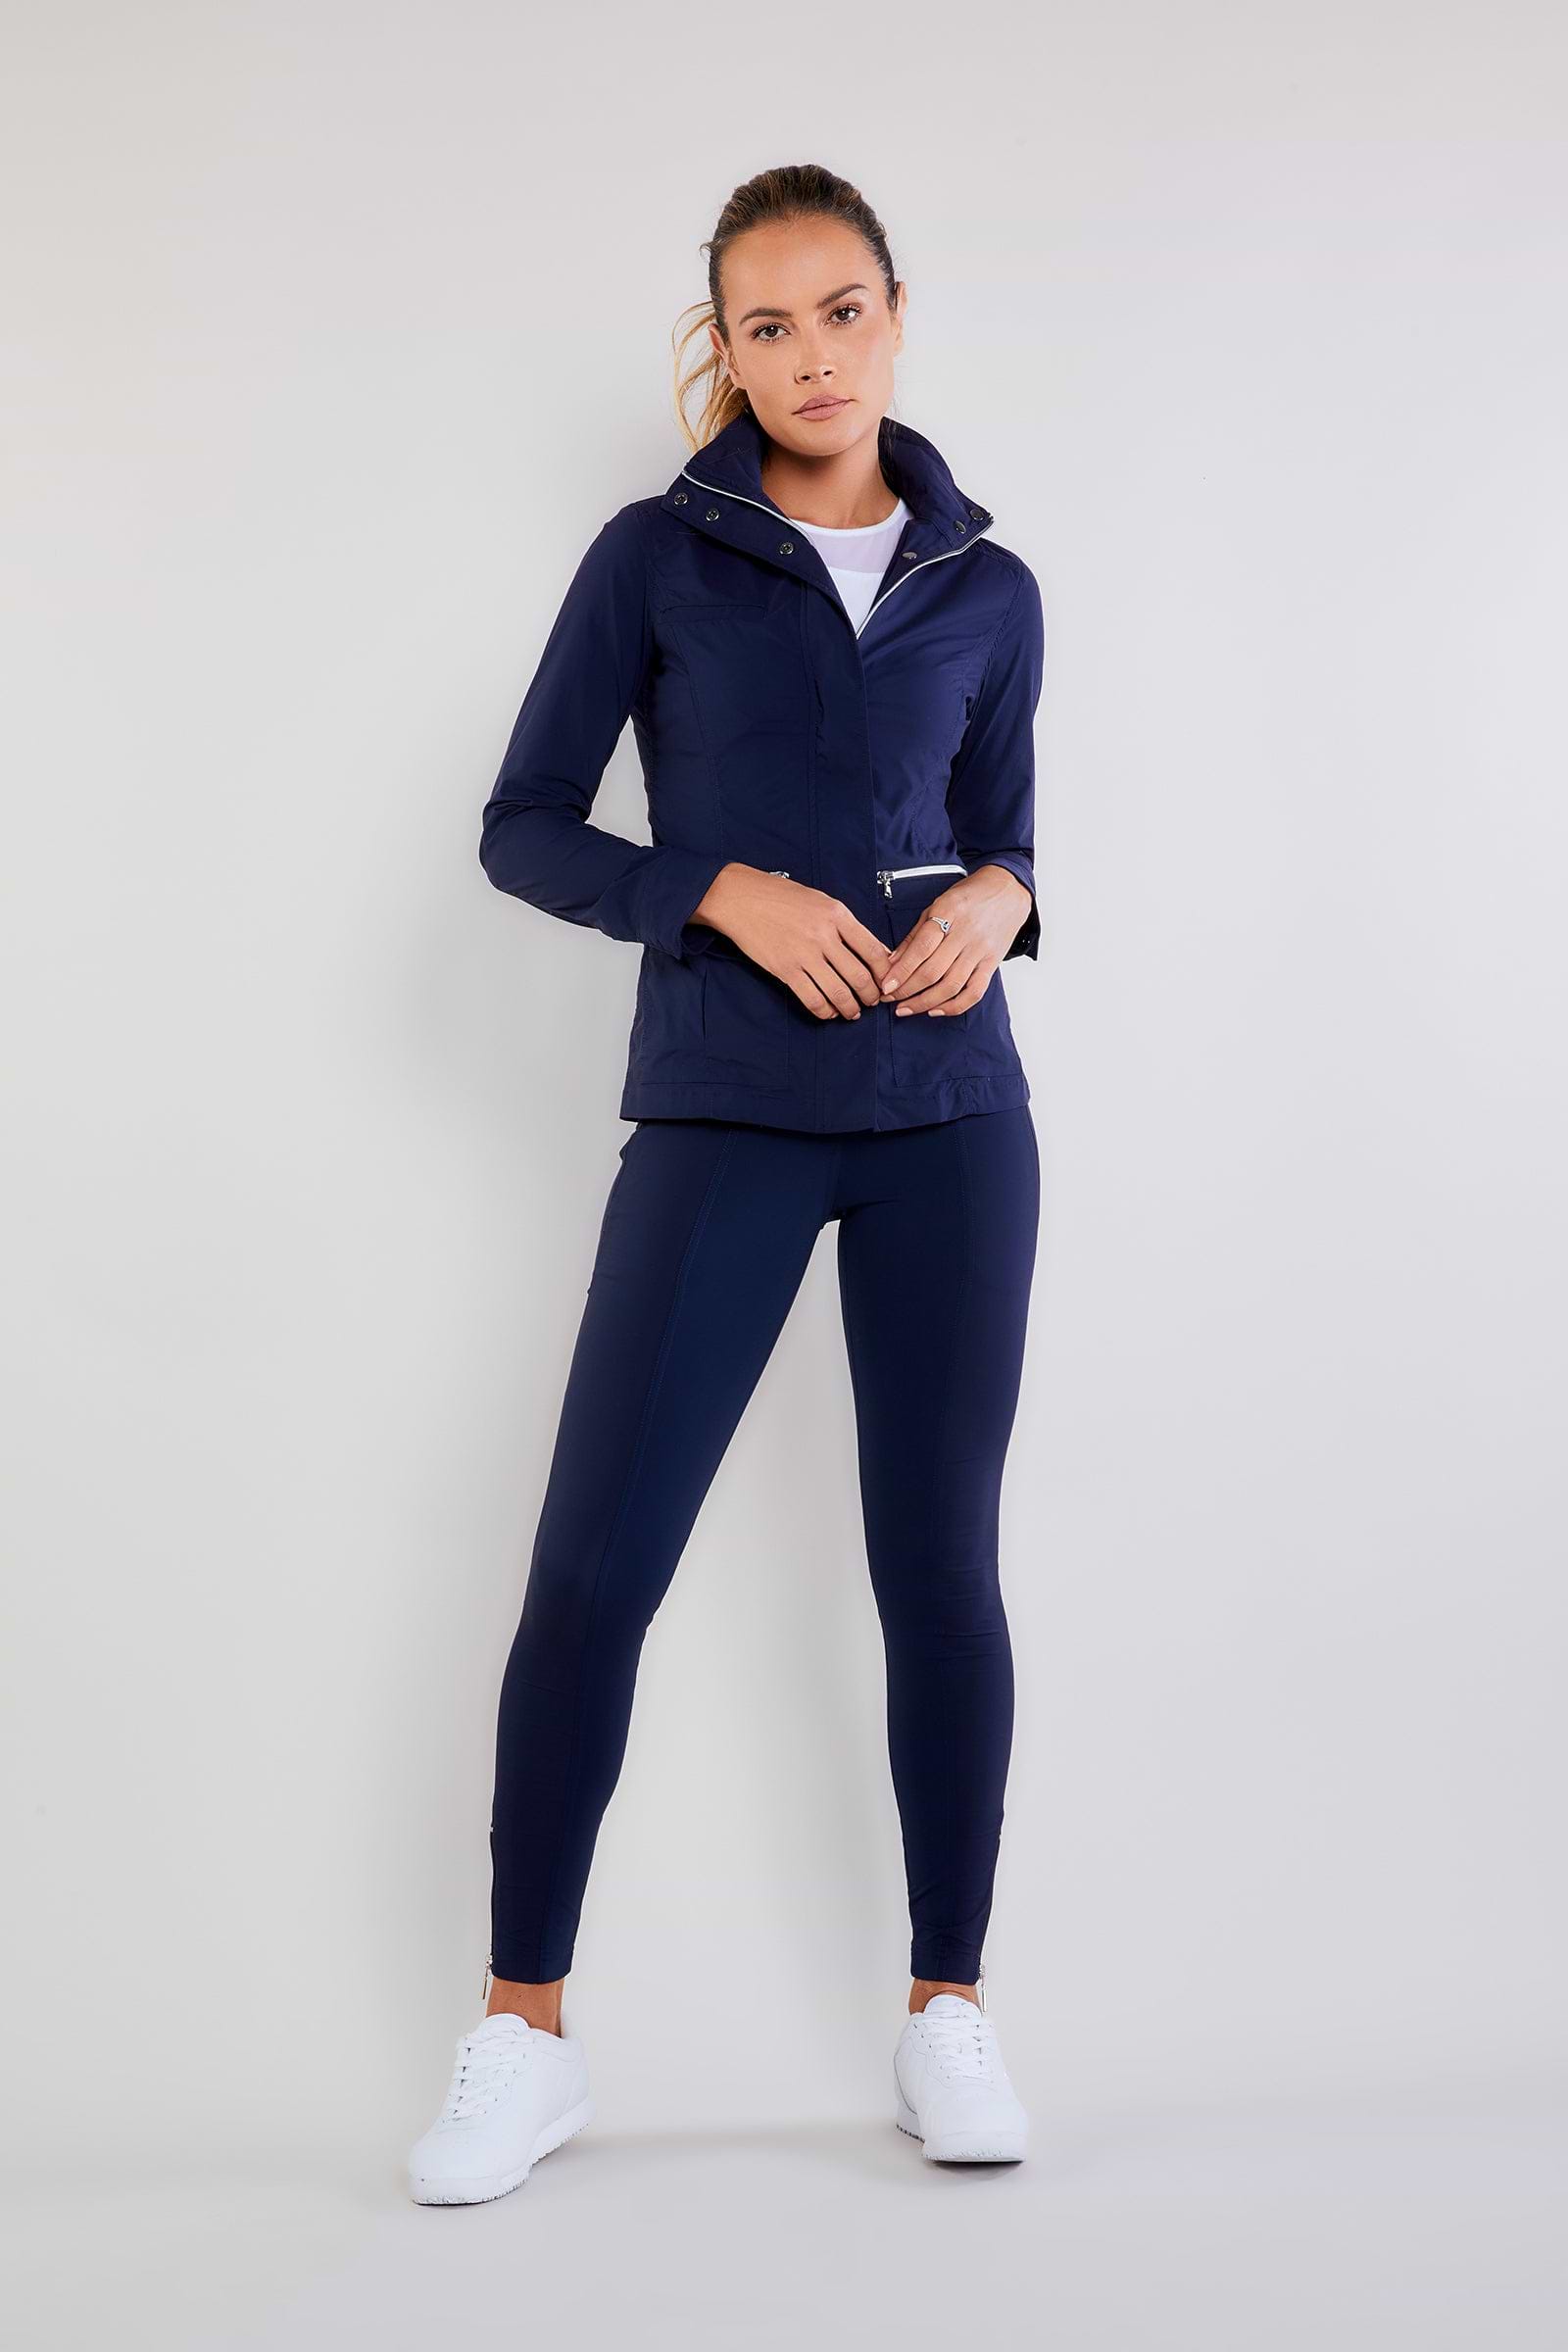 The Best Travel Pants. Woman Showing the Front Profile of the Allie Pant in Navy